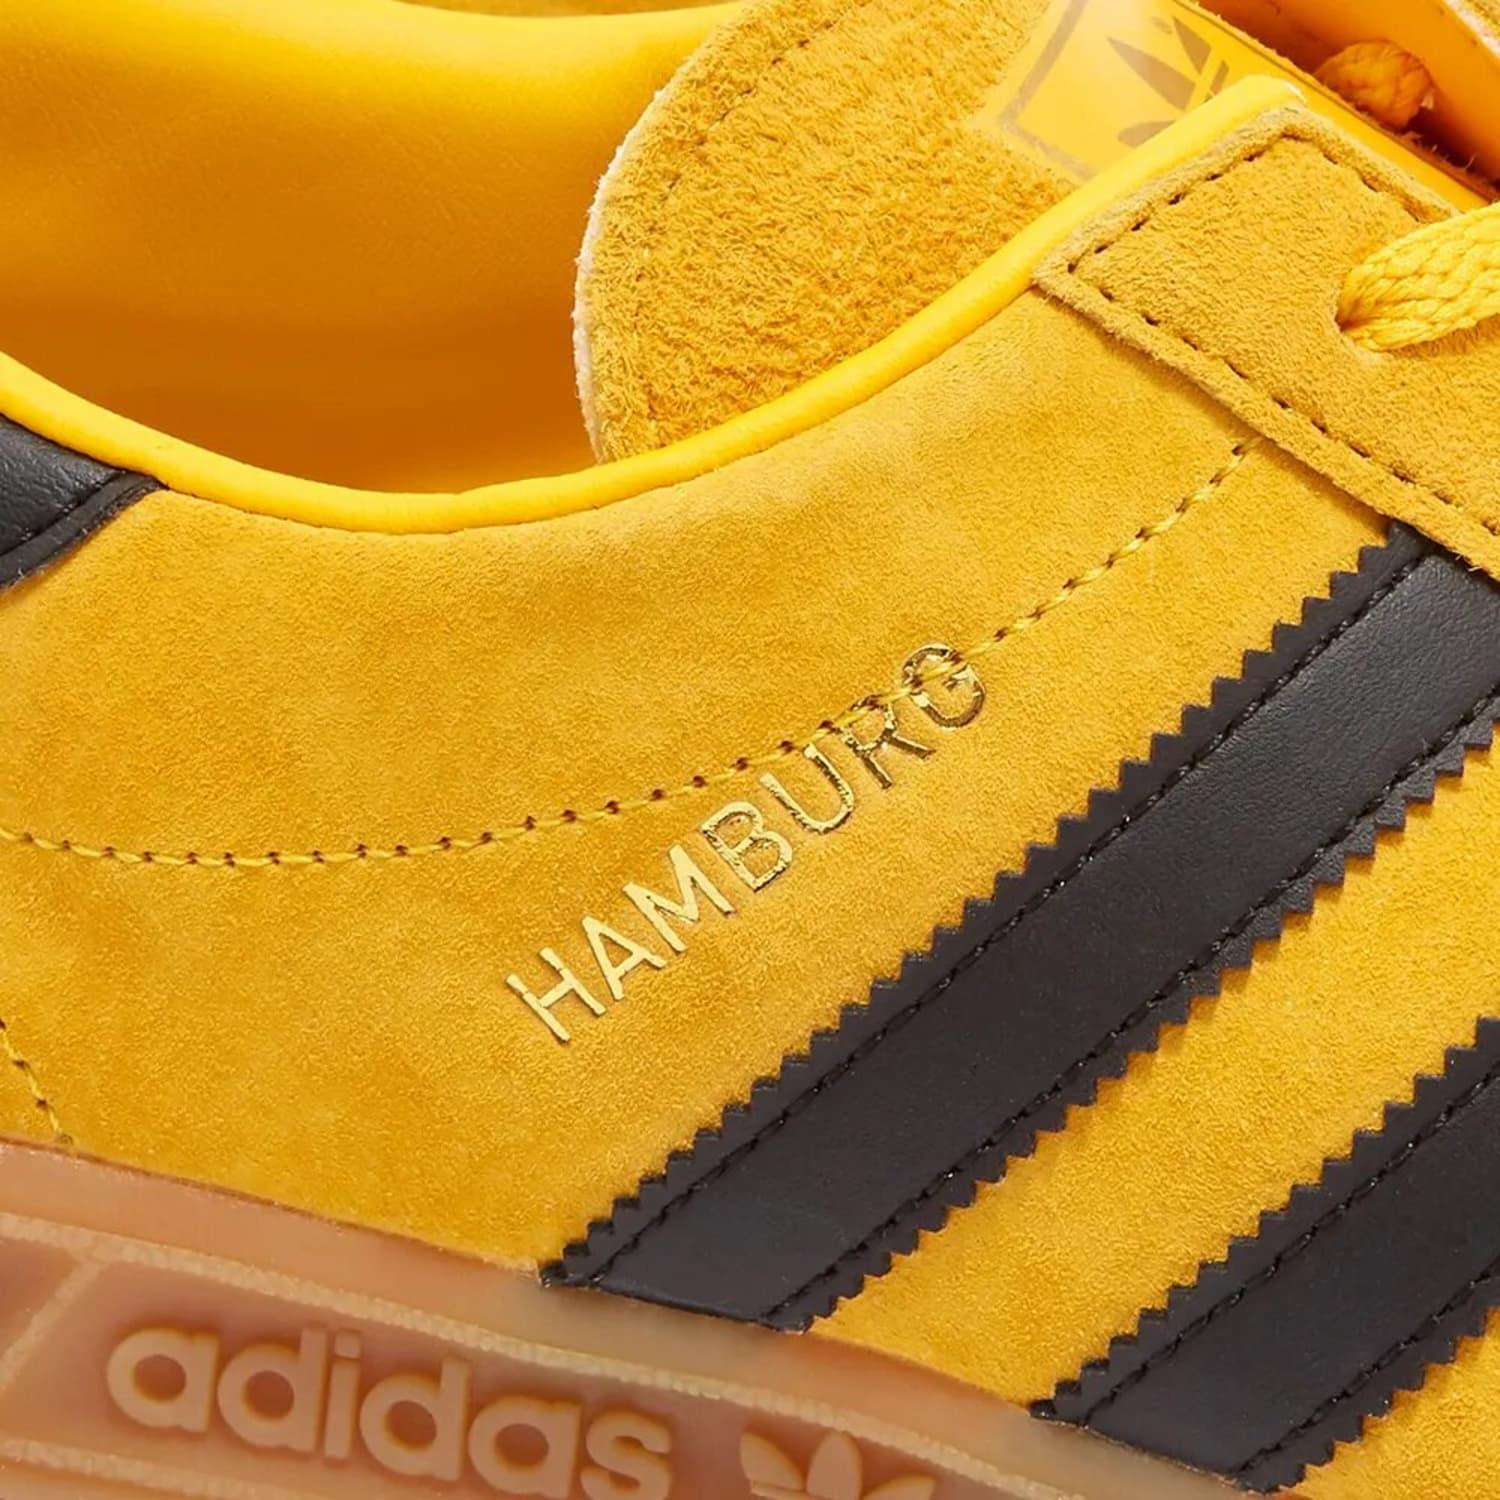 adidas Suede Hamburg in Yellow, Black & Gold (Yellow) for Men - Lyst